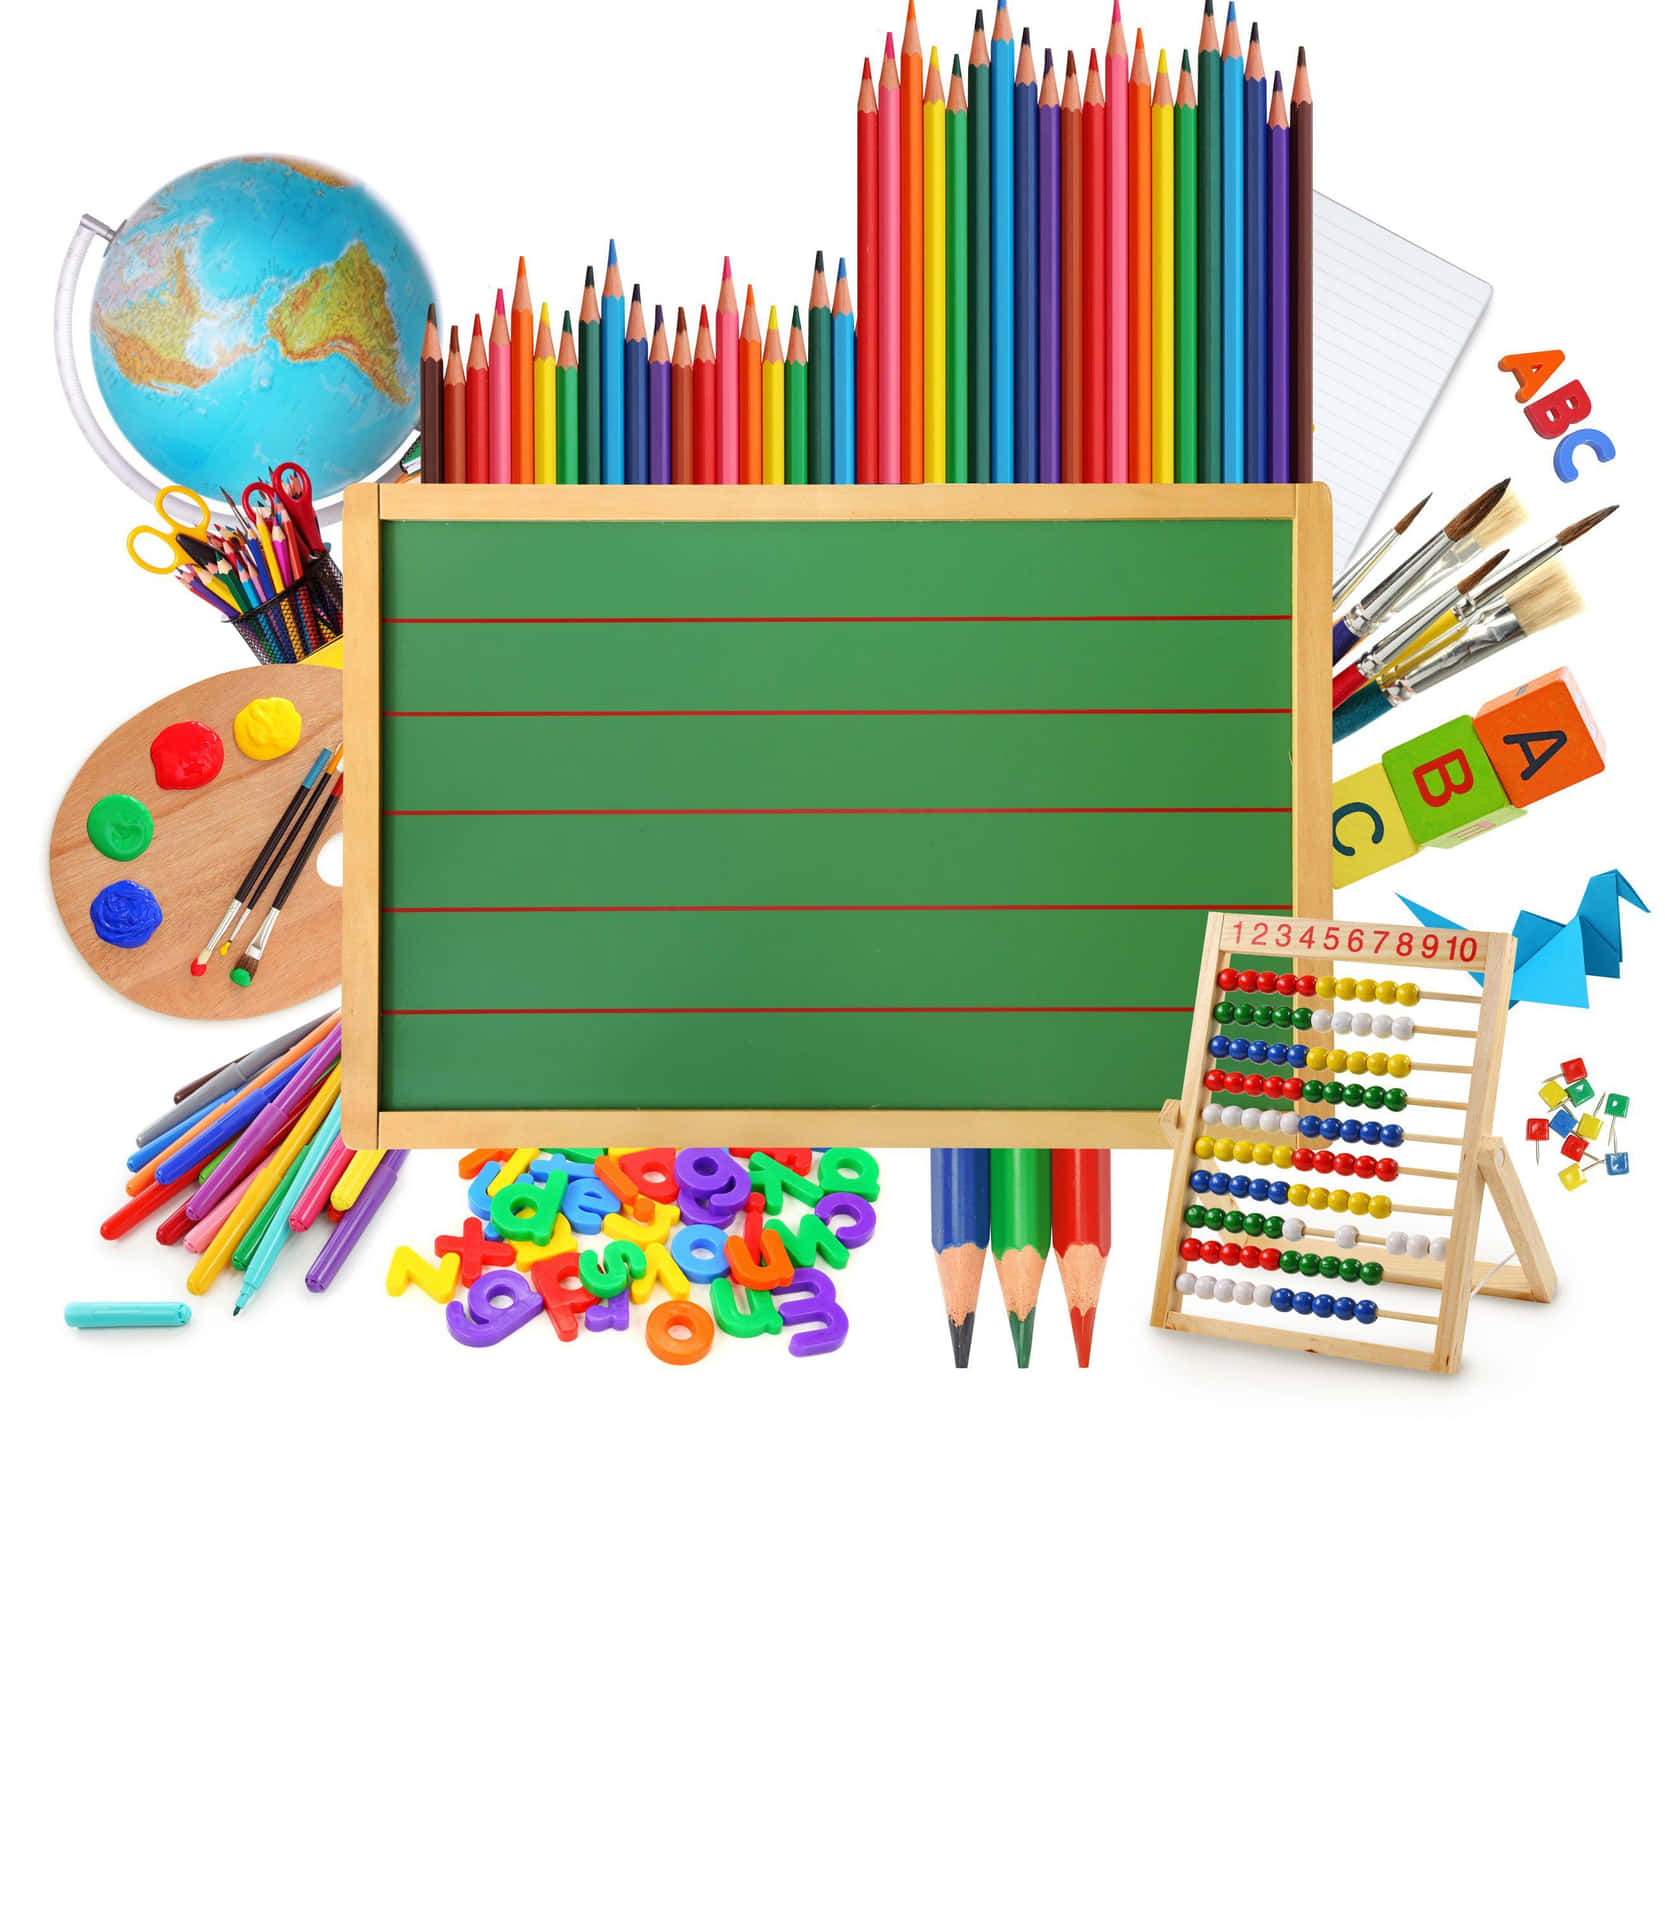 A School Supplies And Pencils On A White Background